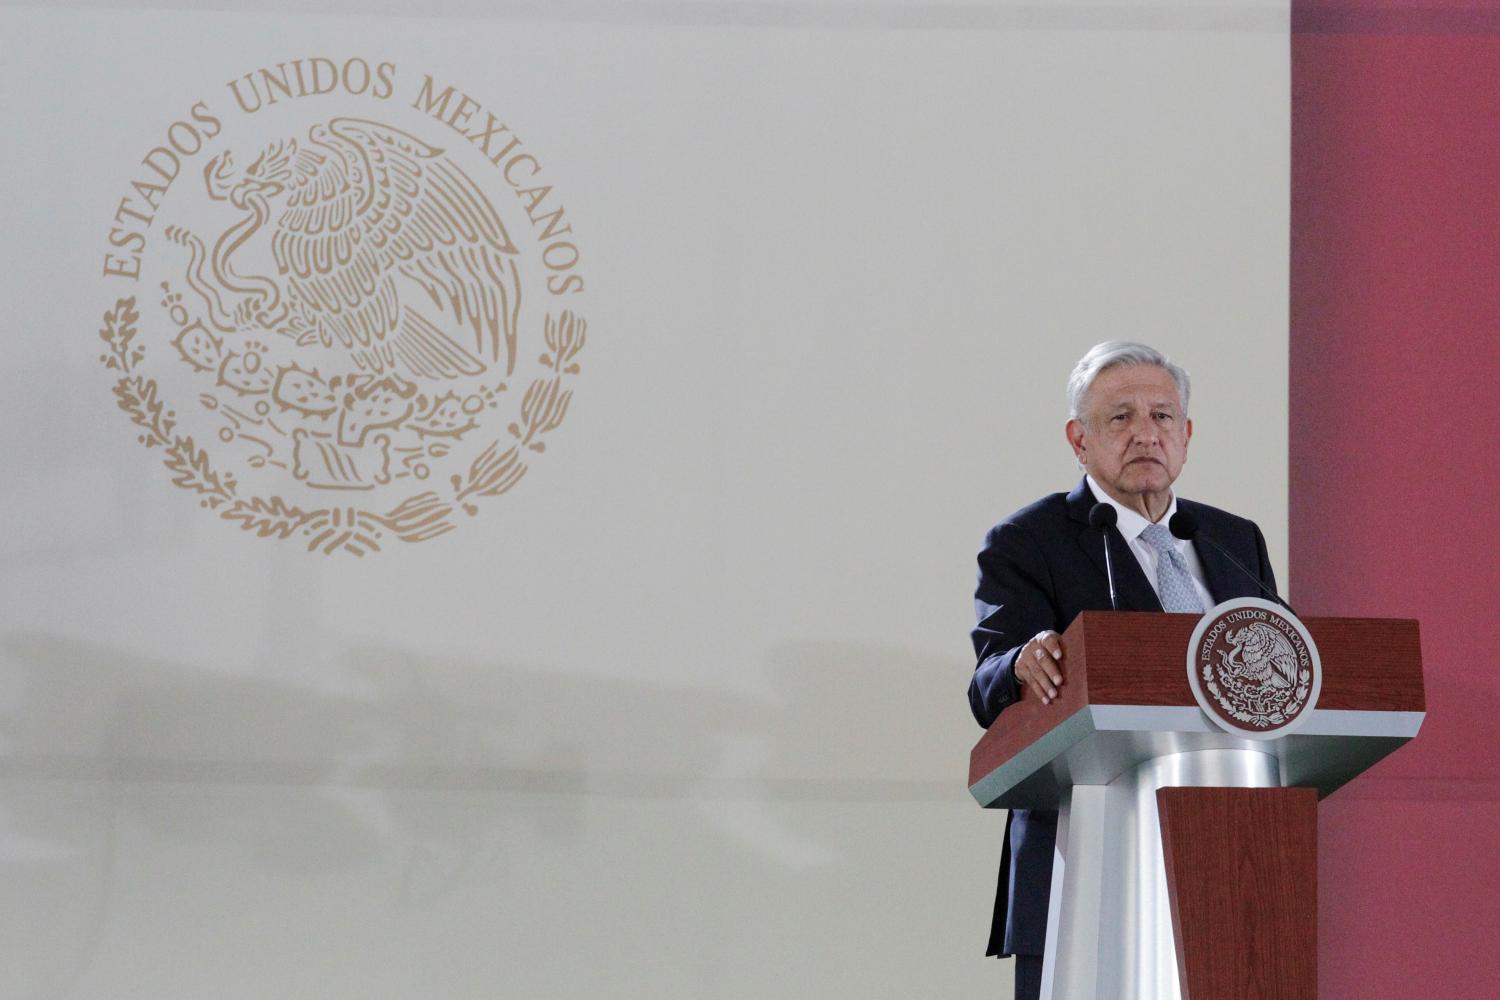 Mexico's President Andres Manuel Lopez Obrador delivers a speech during the Mexican Army Day at the 69th Infantry Battalion in Saltillo, Mexico February 19, 2019. REUTERS/Daniel Becerril - RC19DBBDBFF0